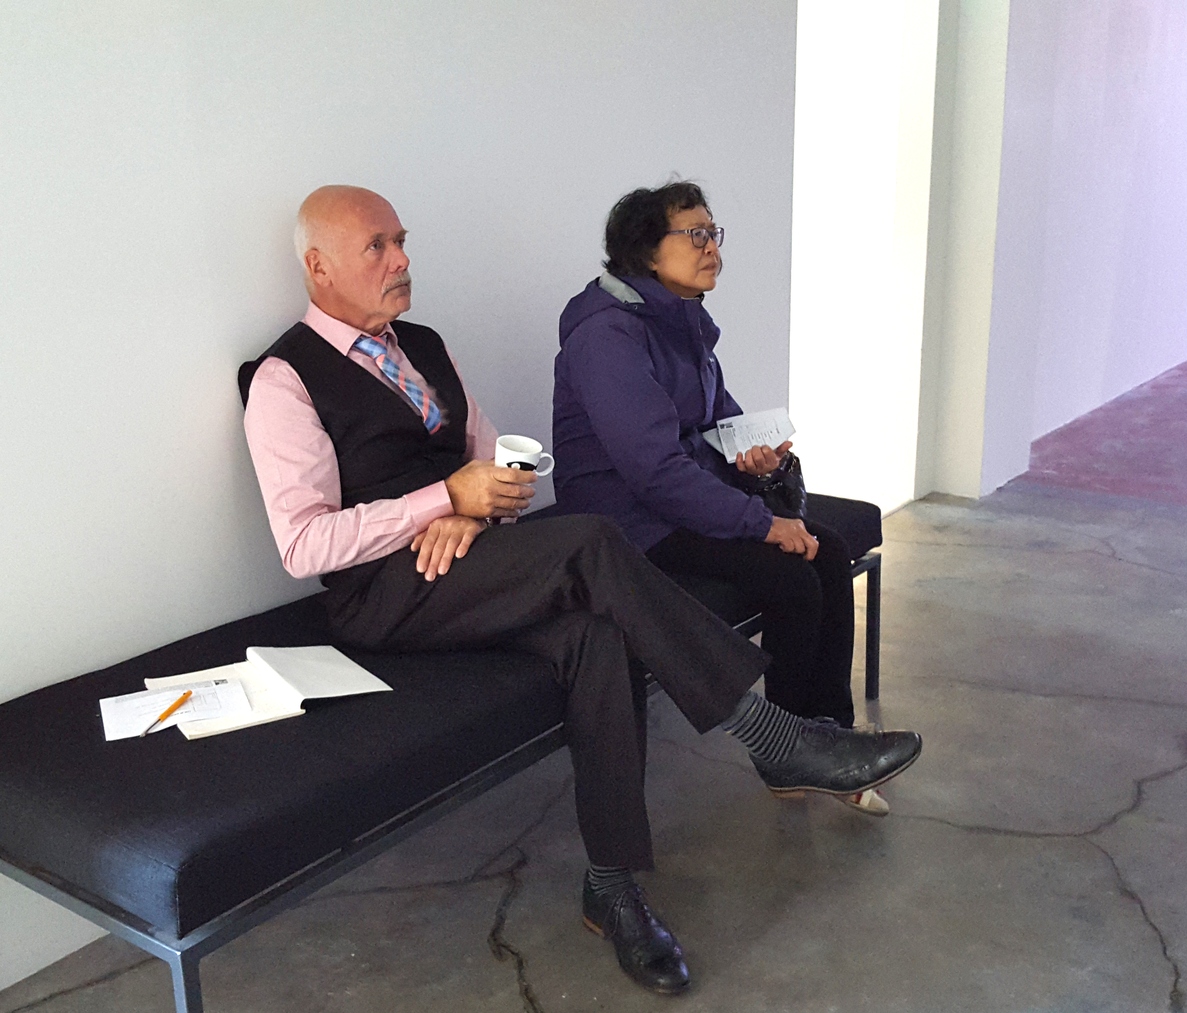 Roeland Simons and Serene Hu in the midst of an intense judging process.